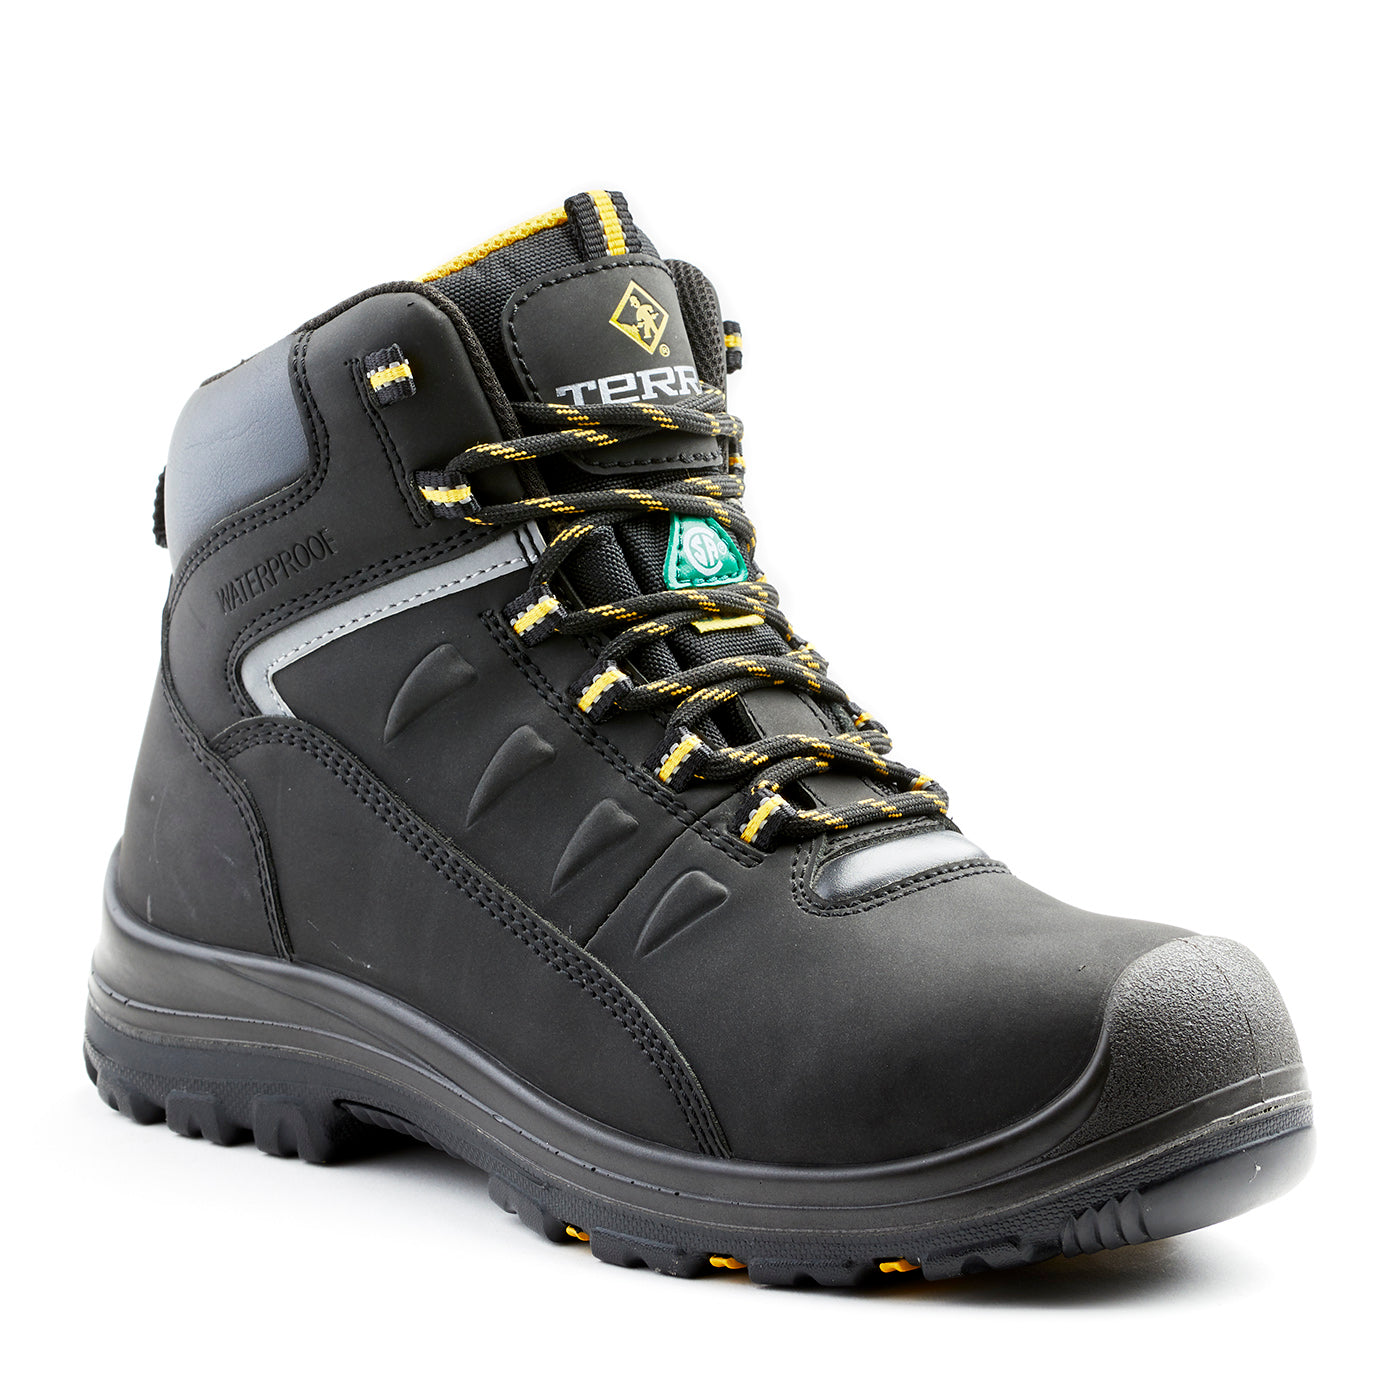 Terra Findlay Composite Toe 6" Men's Safety Boots | Black | Sizes 7-14 Work Boots - Cleanflow